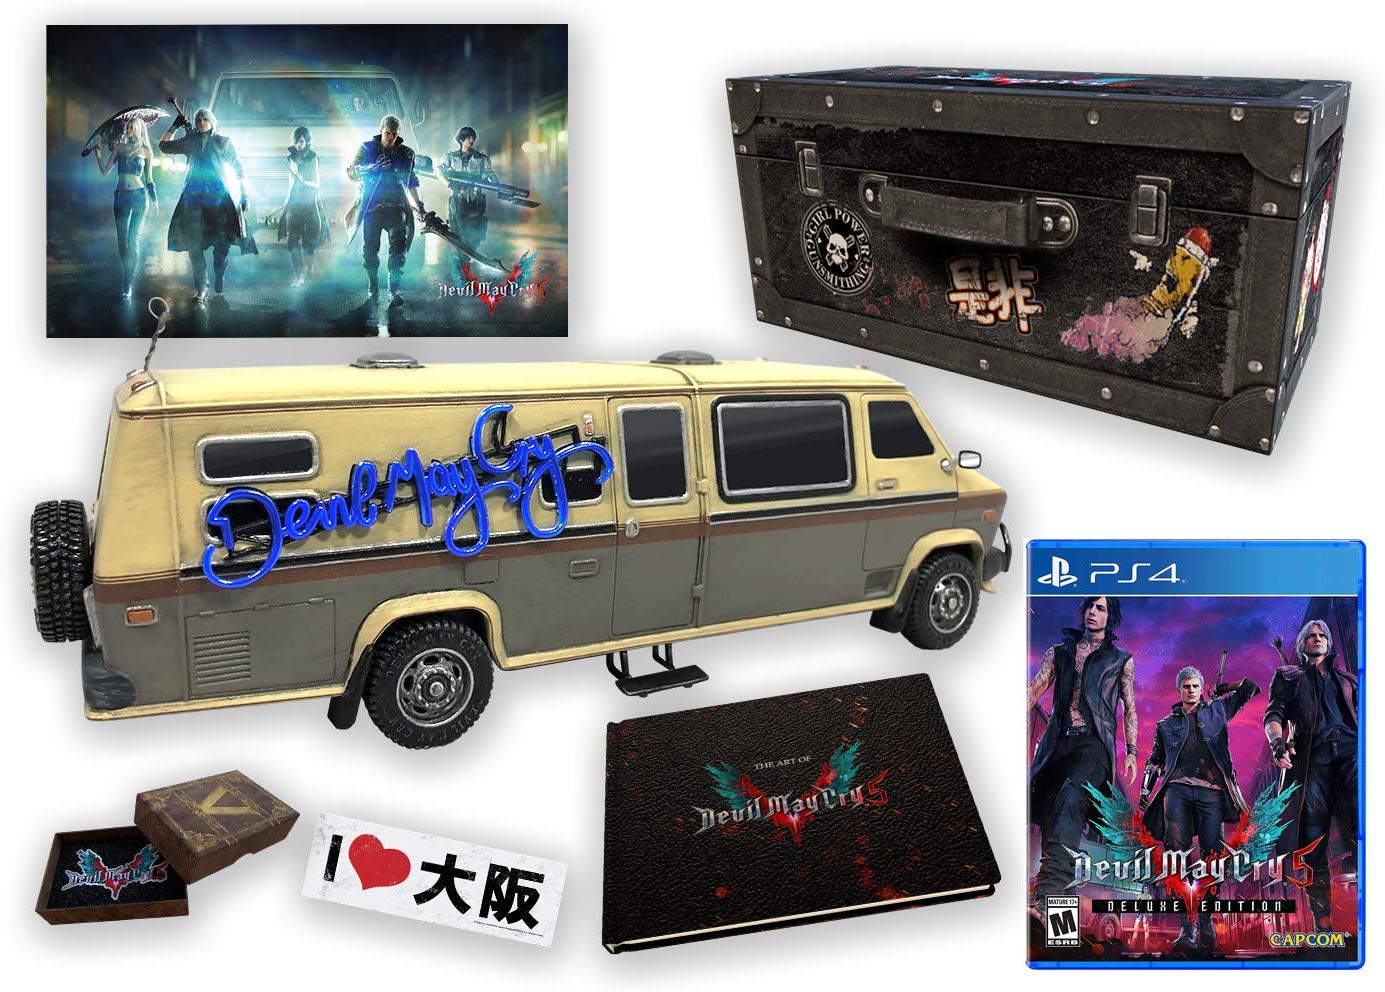 Image for Devil May Cry 5 Collector's Edition comes with a replica van, art book, other physical items